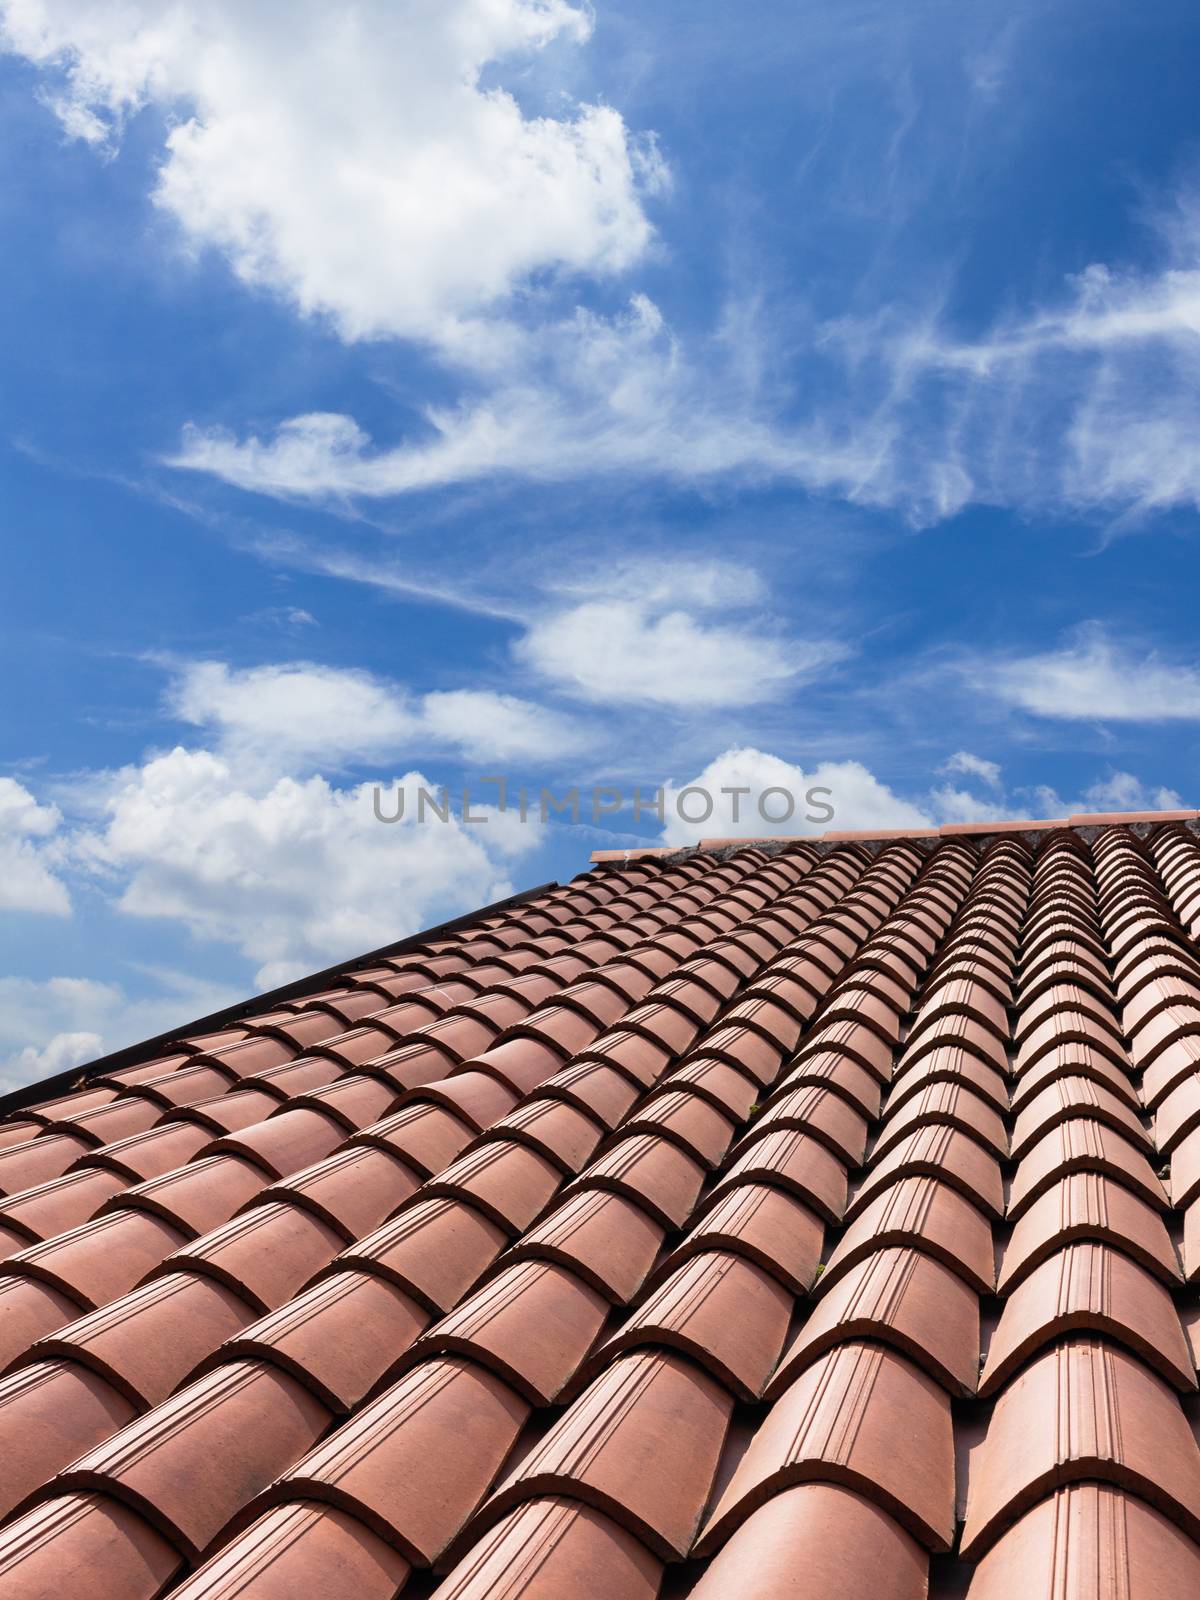 New tiled roof by germanopoli